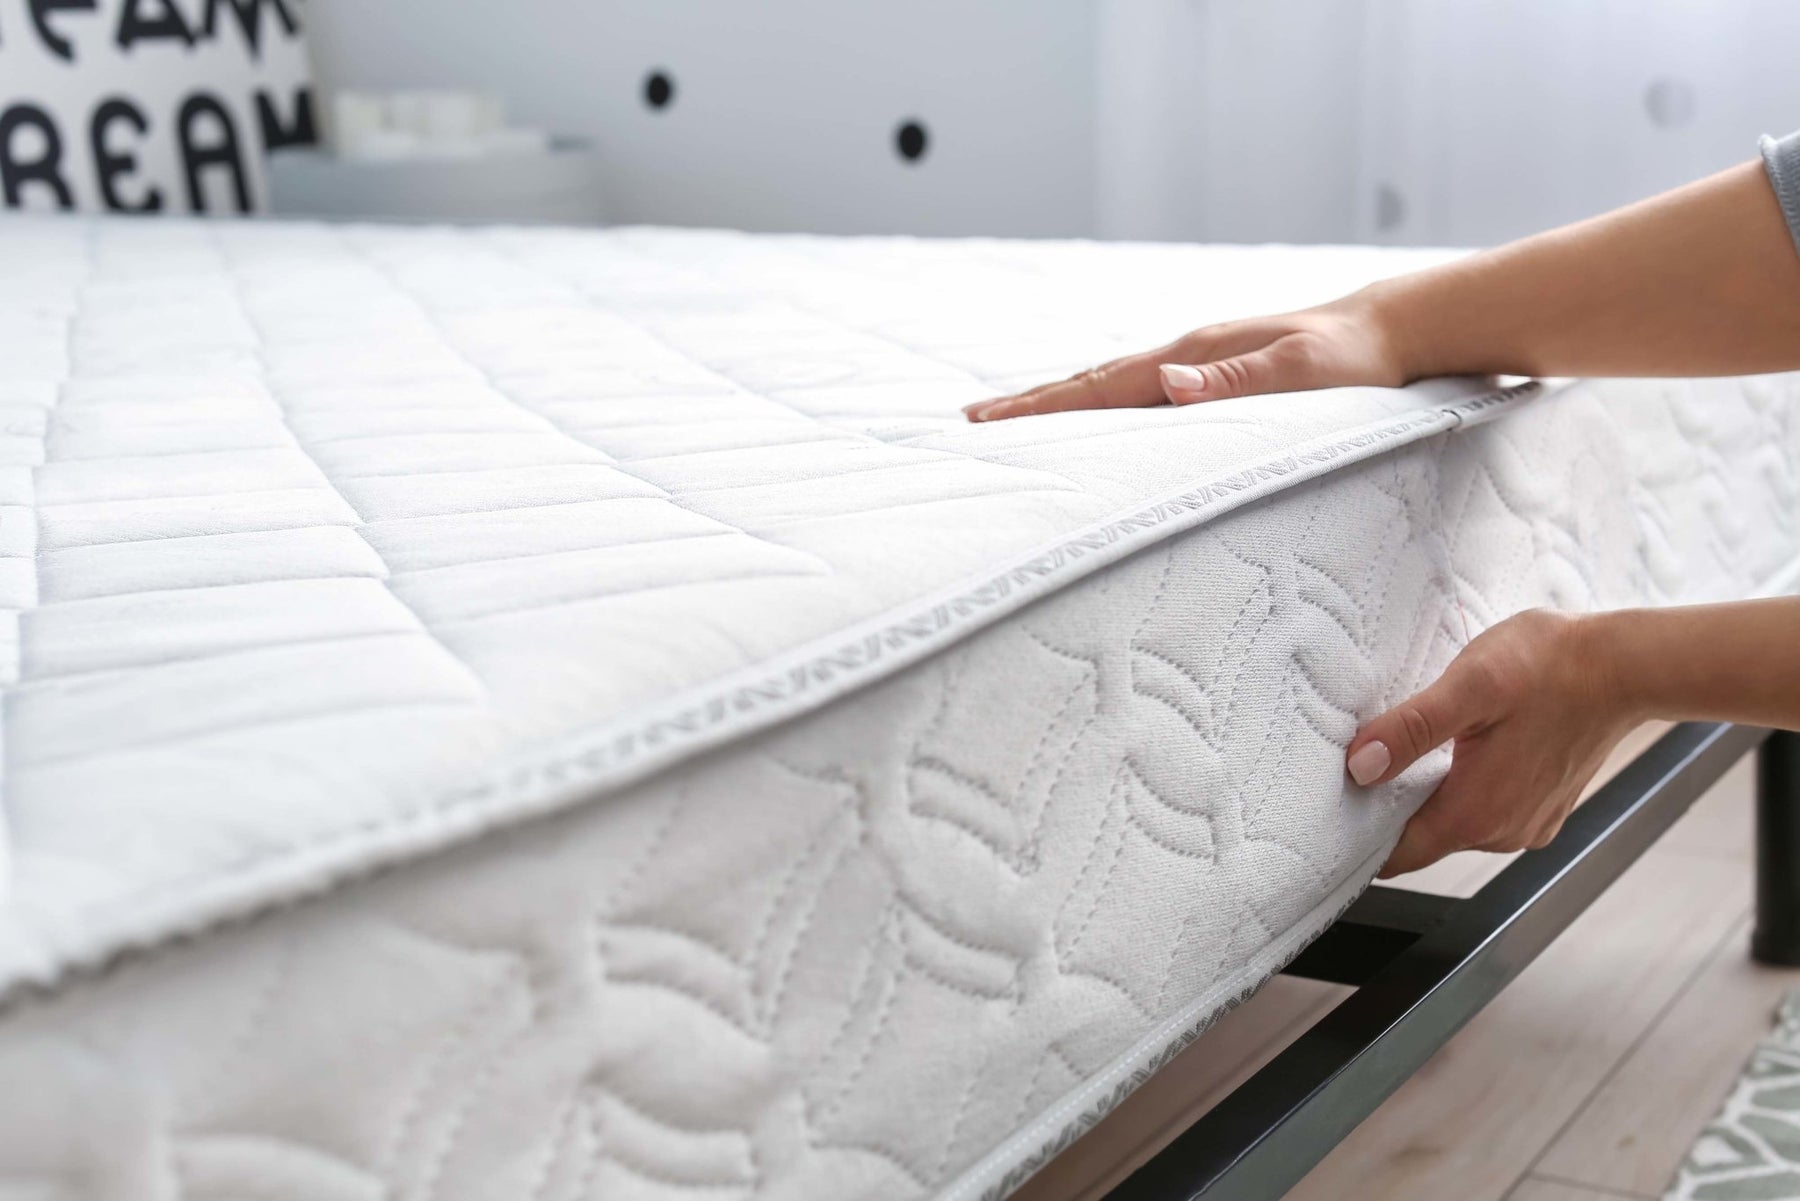 Tips for Maintaining and Prolonging the Lifespan of Your RV Mattress